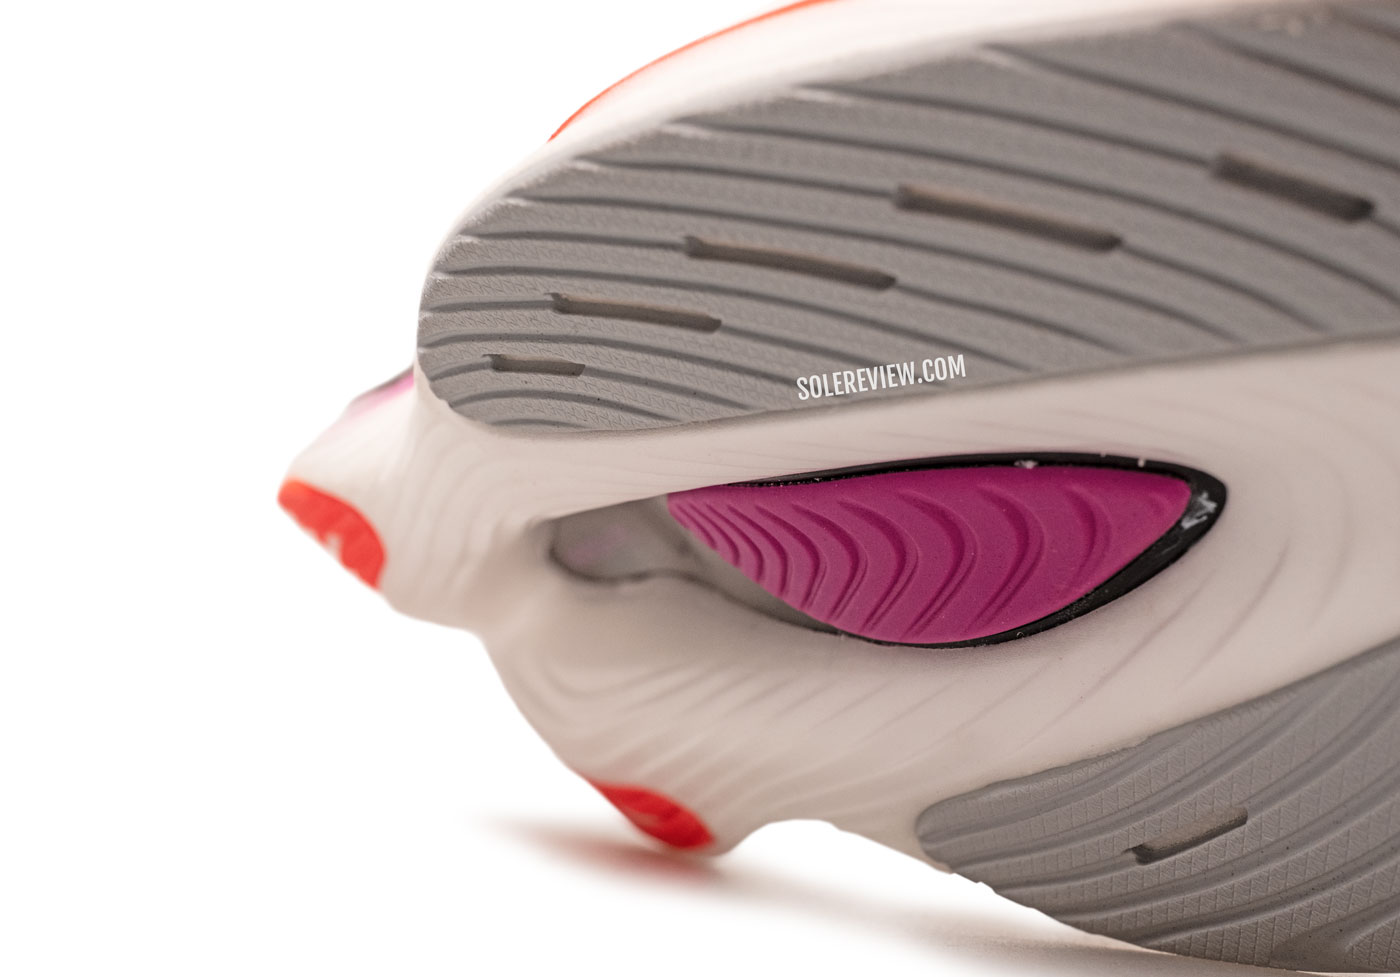 The forefoot gap of the New Balance SC Elite V3.